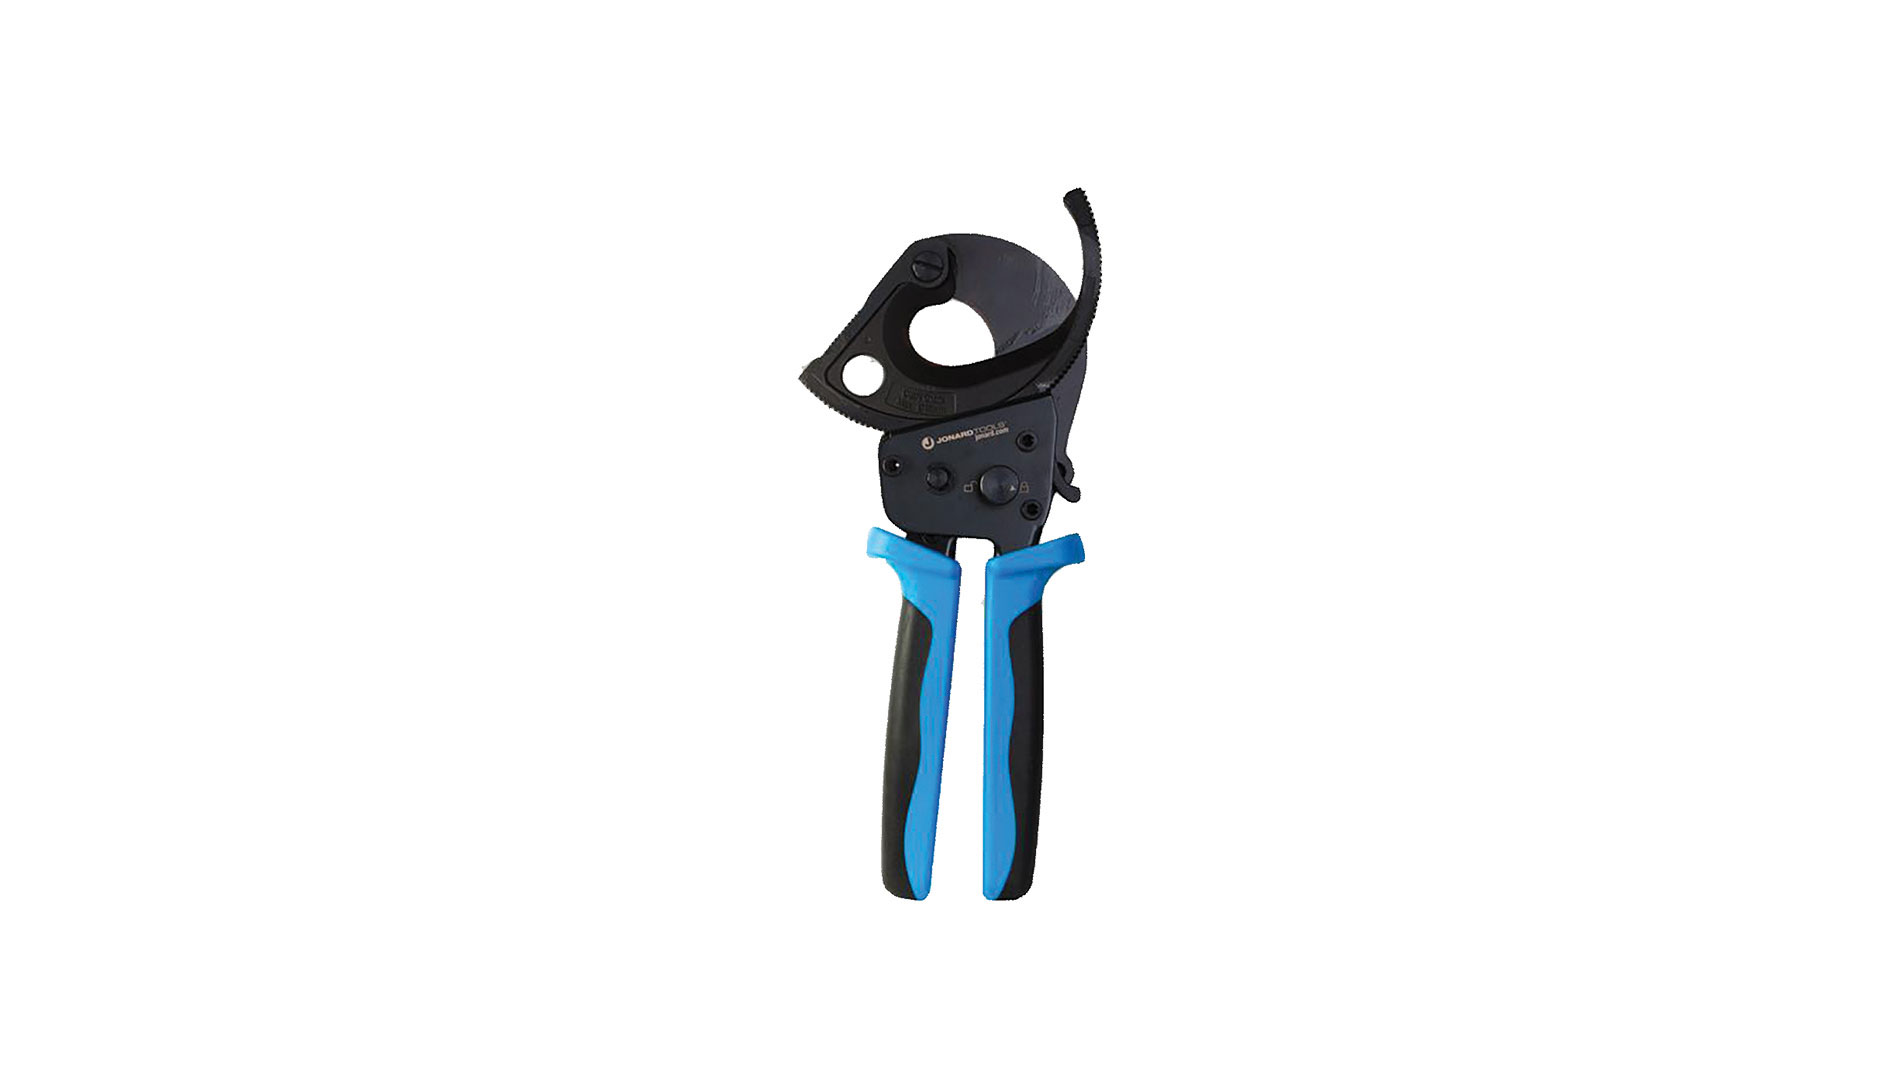 Black and blue racheting cable cutter. Image by Jonard Tools.